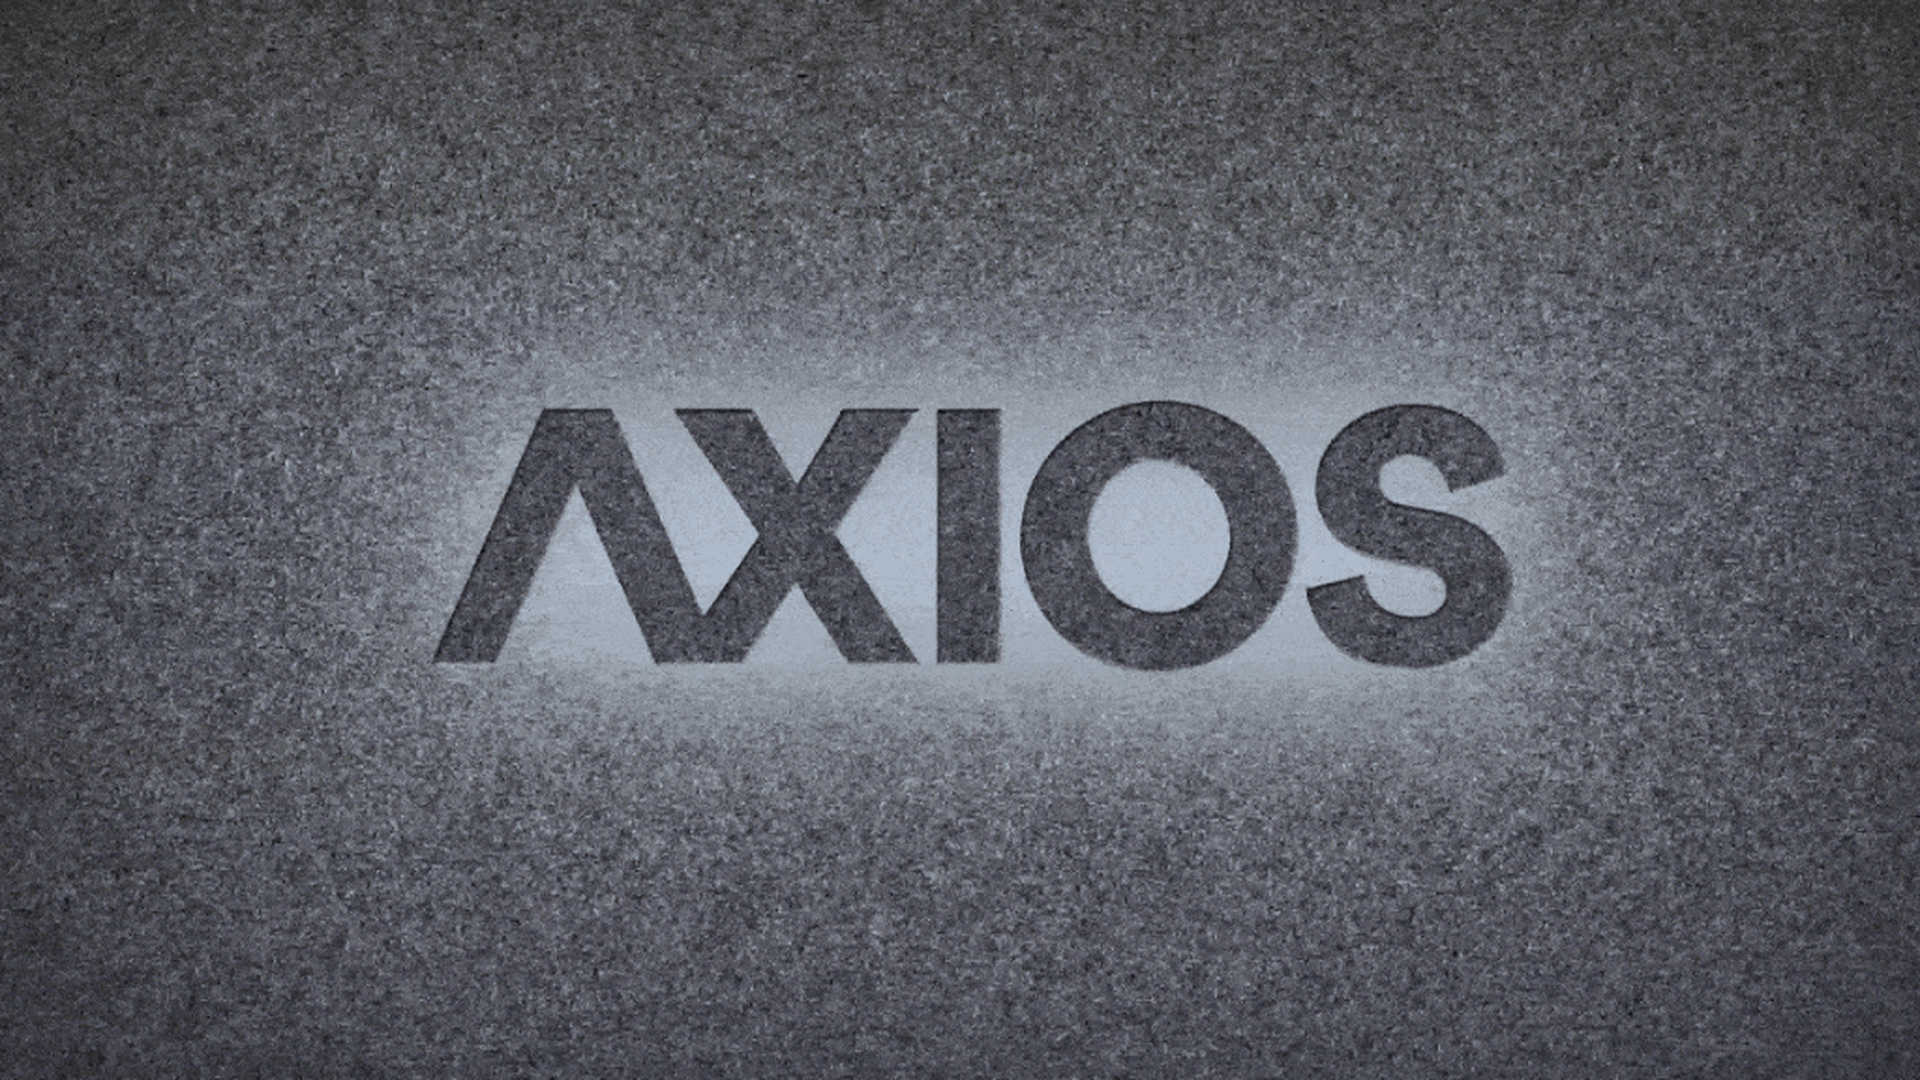 Axios to debut on HBO ahead of 2018 midterm elections - Axios1920 x 1080